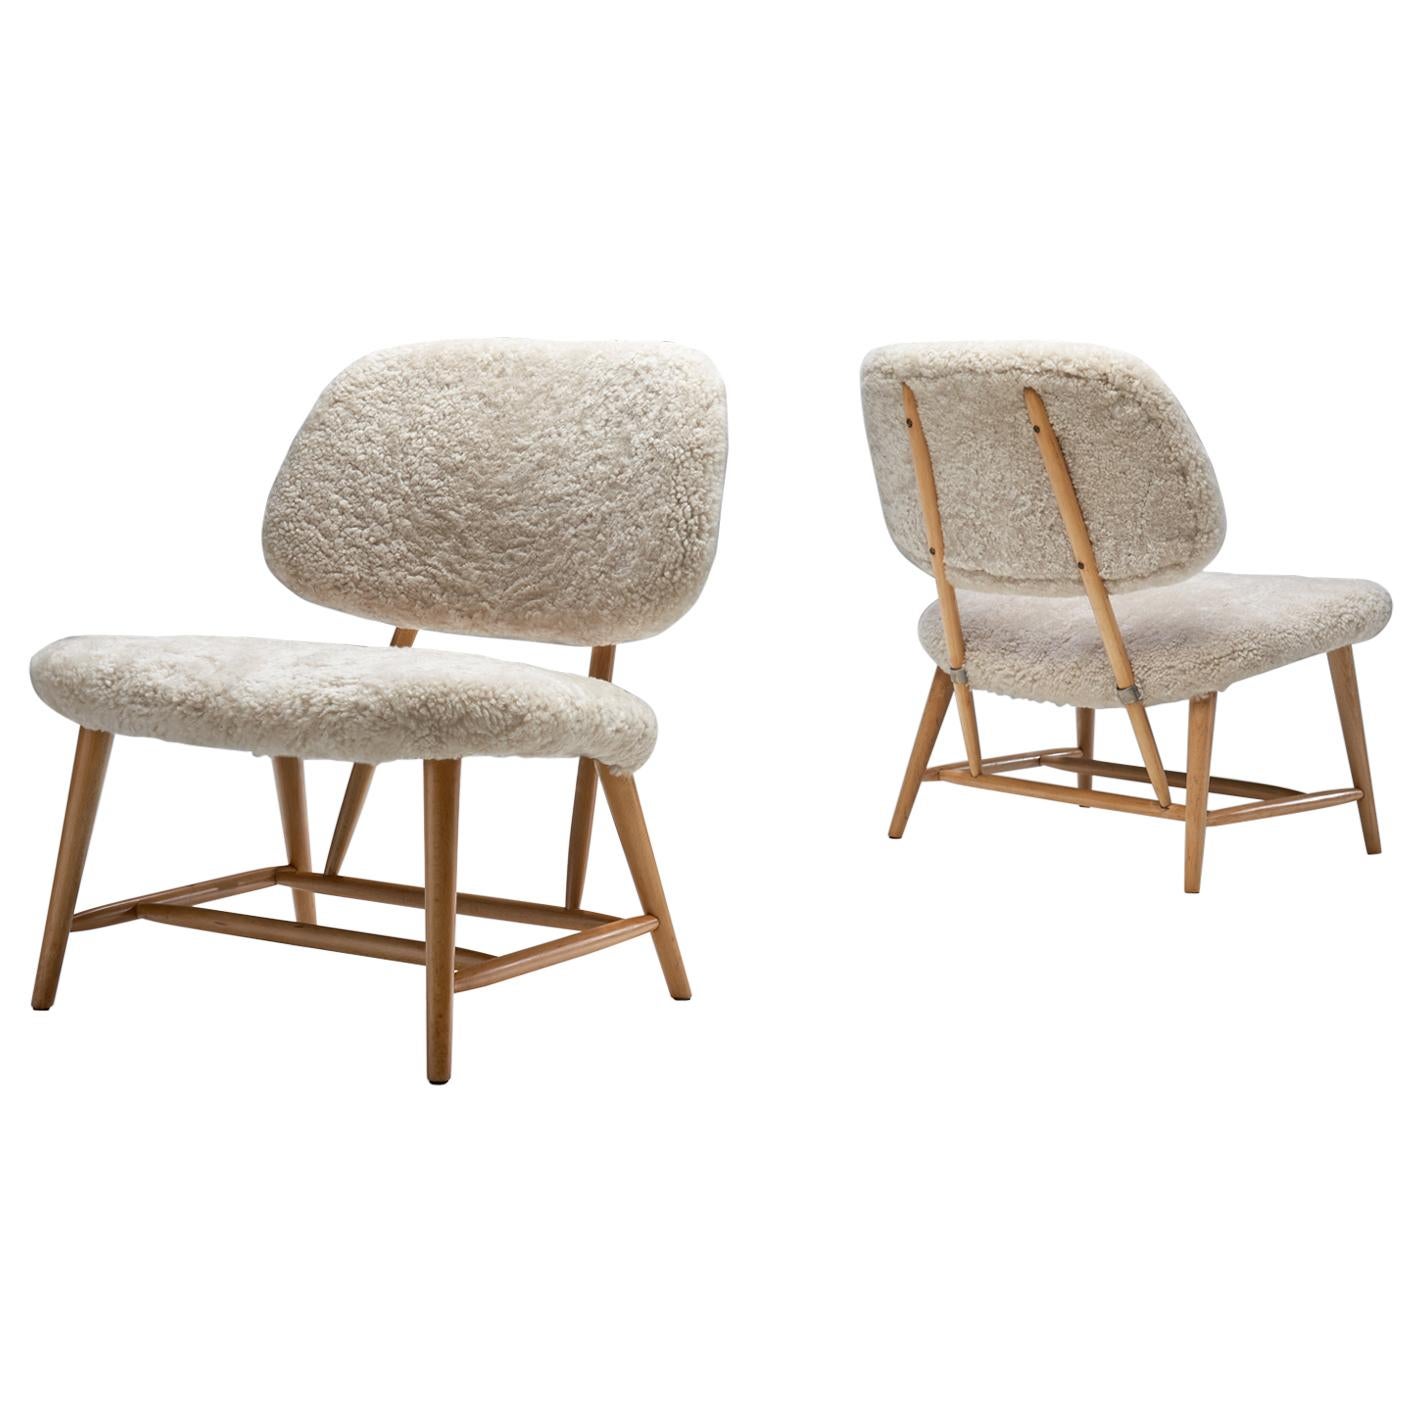 Pair of “TeVe” Chairs by Alf Svensson for Studio Ljungs Industrier AB, SWE